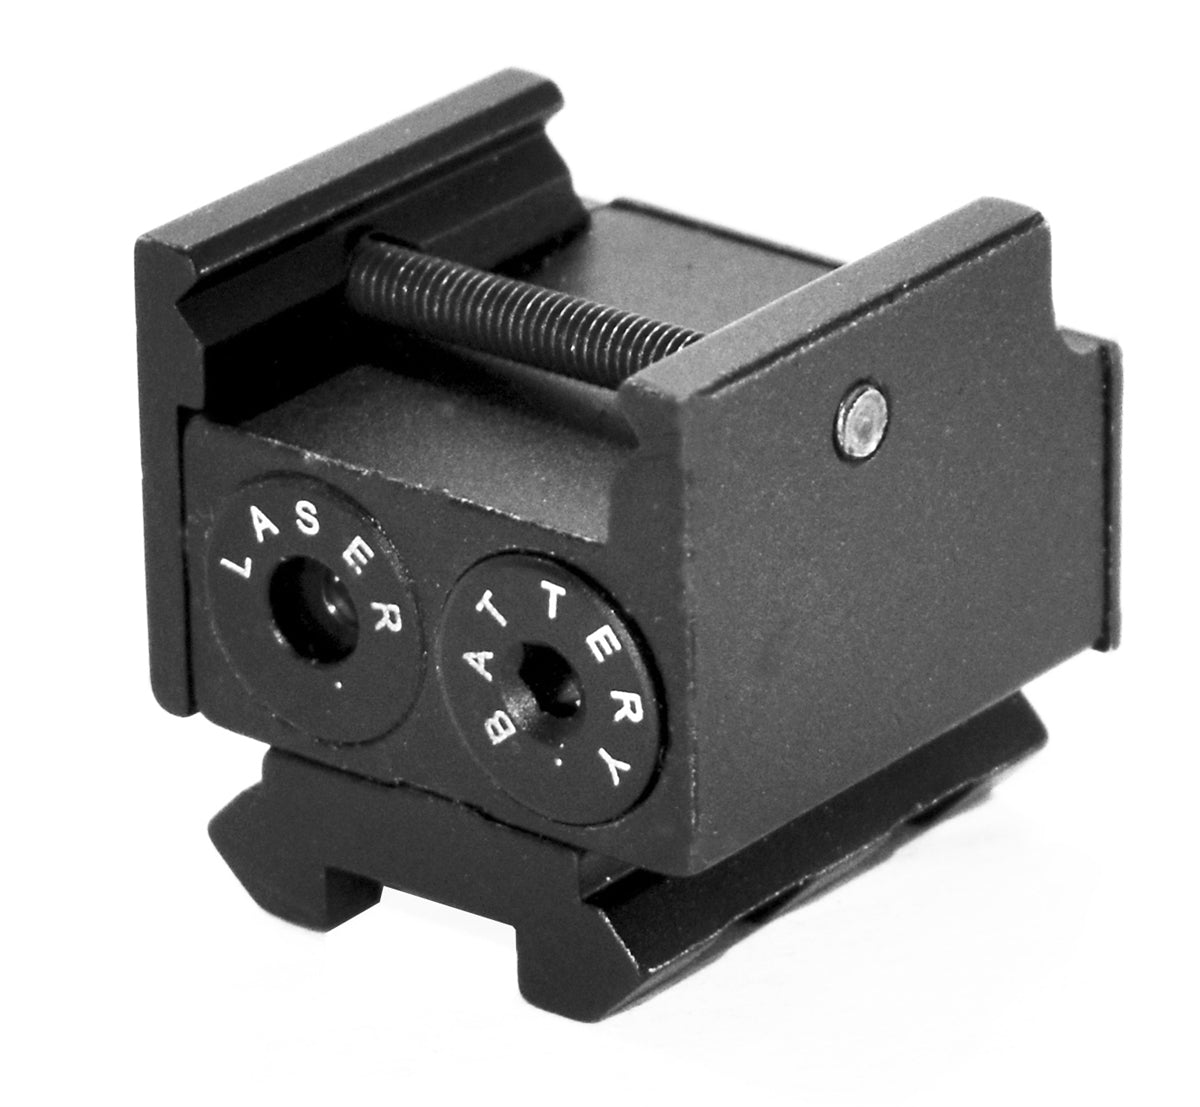 Trinity Compact Red Pistol Laser Sight For M&P® 380 Shield Smith and Wesson sd9 Handguns.